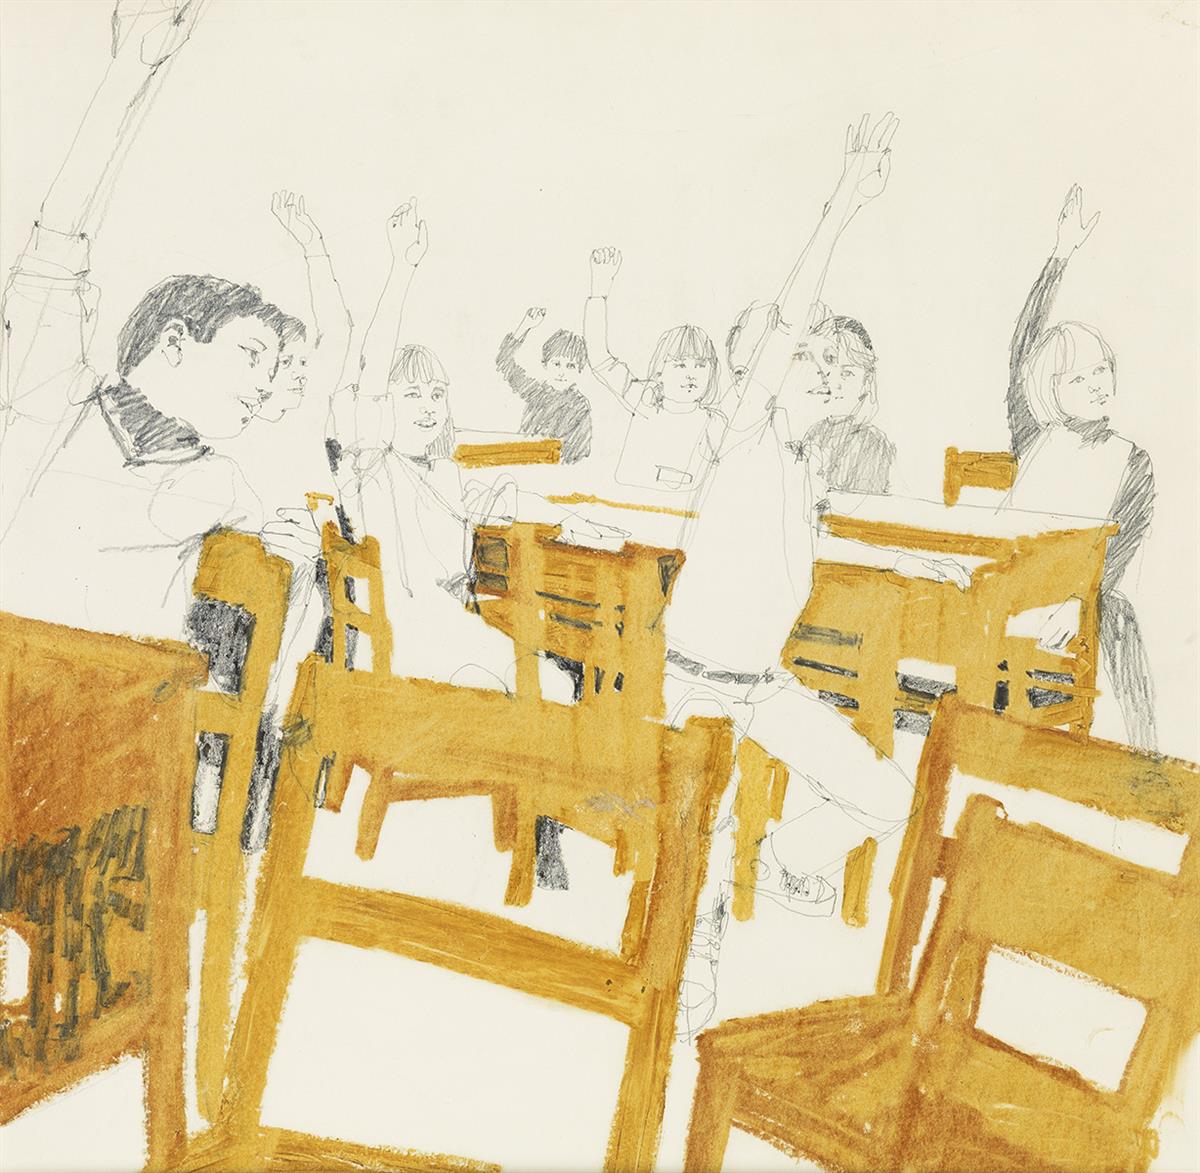 BERNIE FUCHS. (EDUCATION) Who knows the answer?